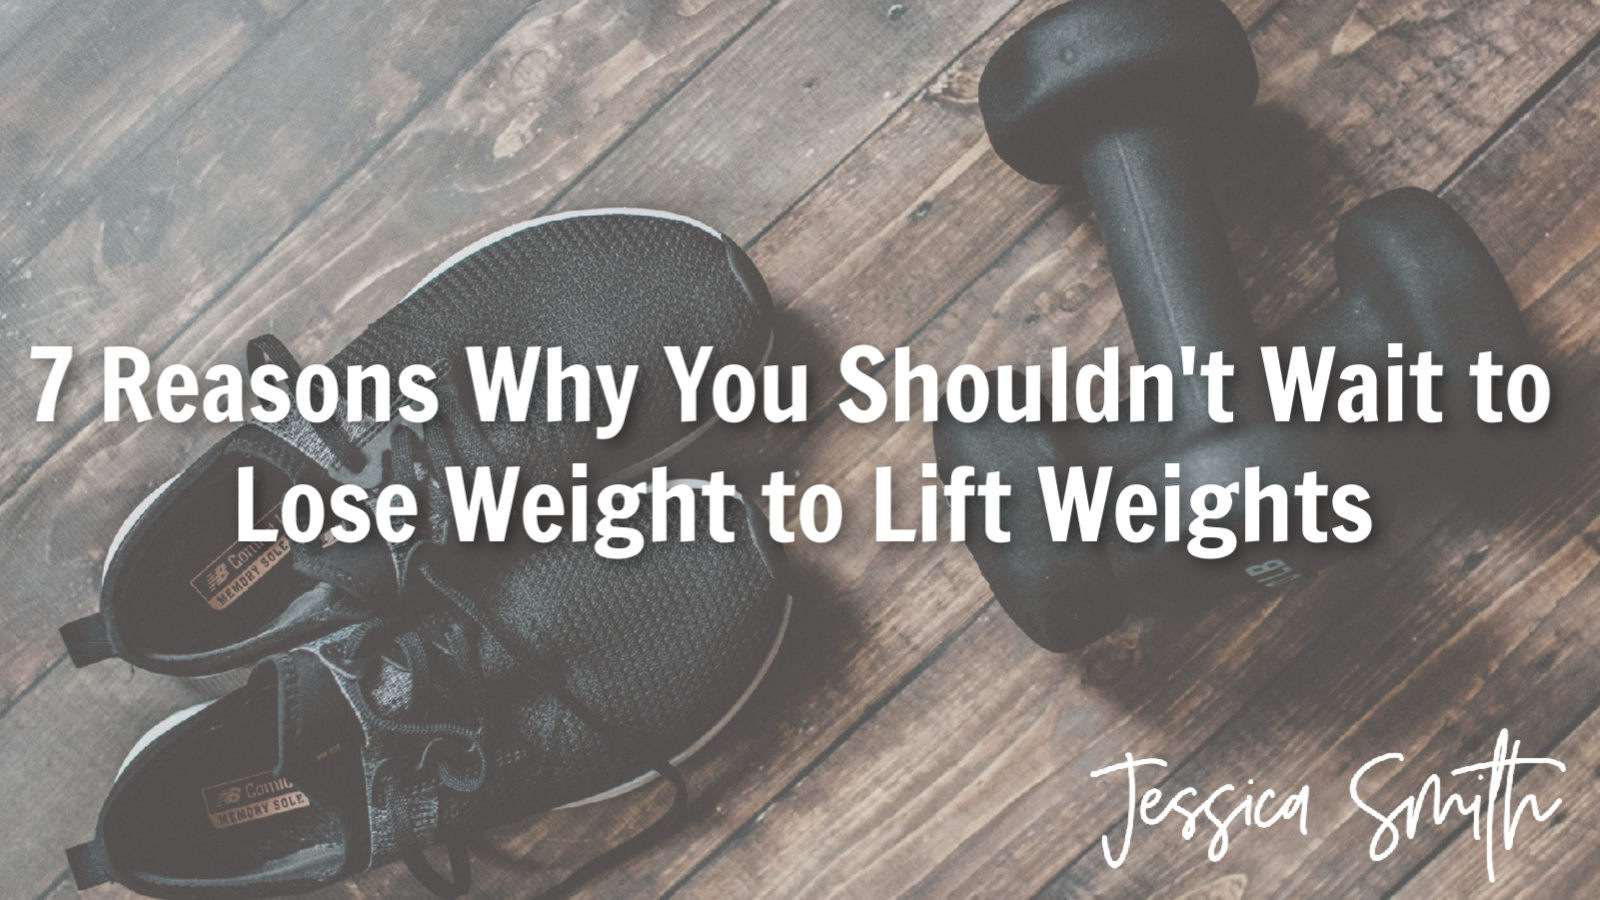 7 Reasons Why You Shouldn't Wait to Lose Weight to Lift Weights by Jessica Smith